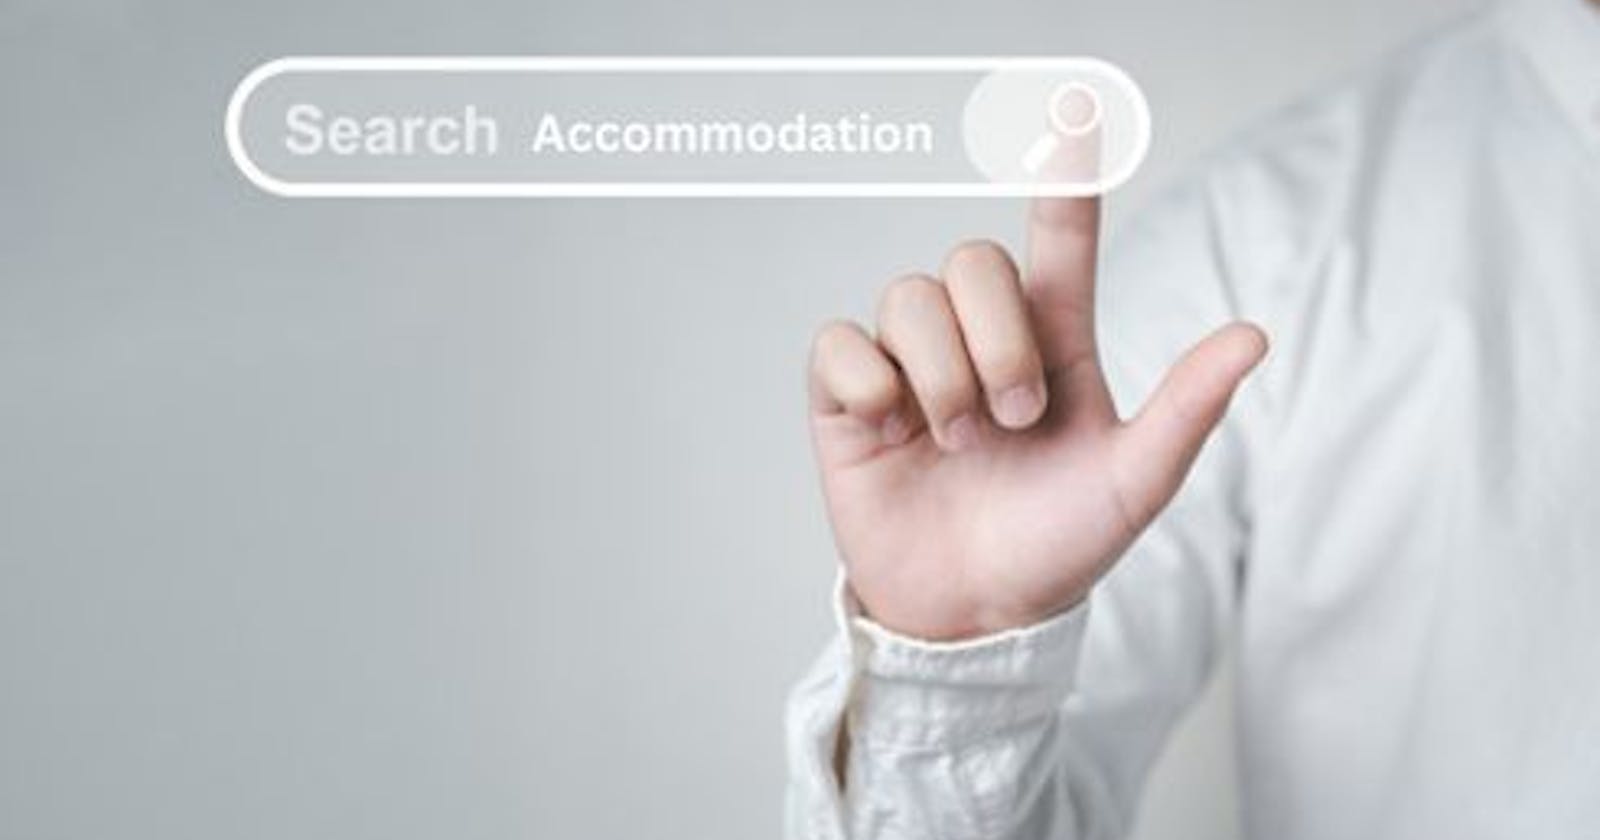 The best way to find the right Student Accommodation